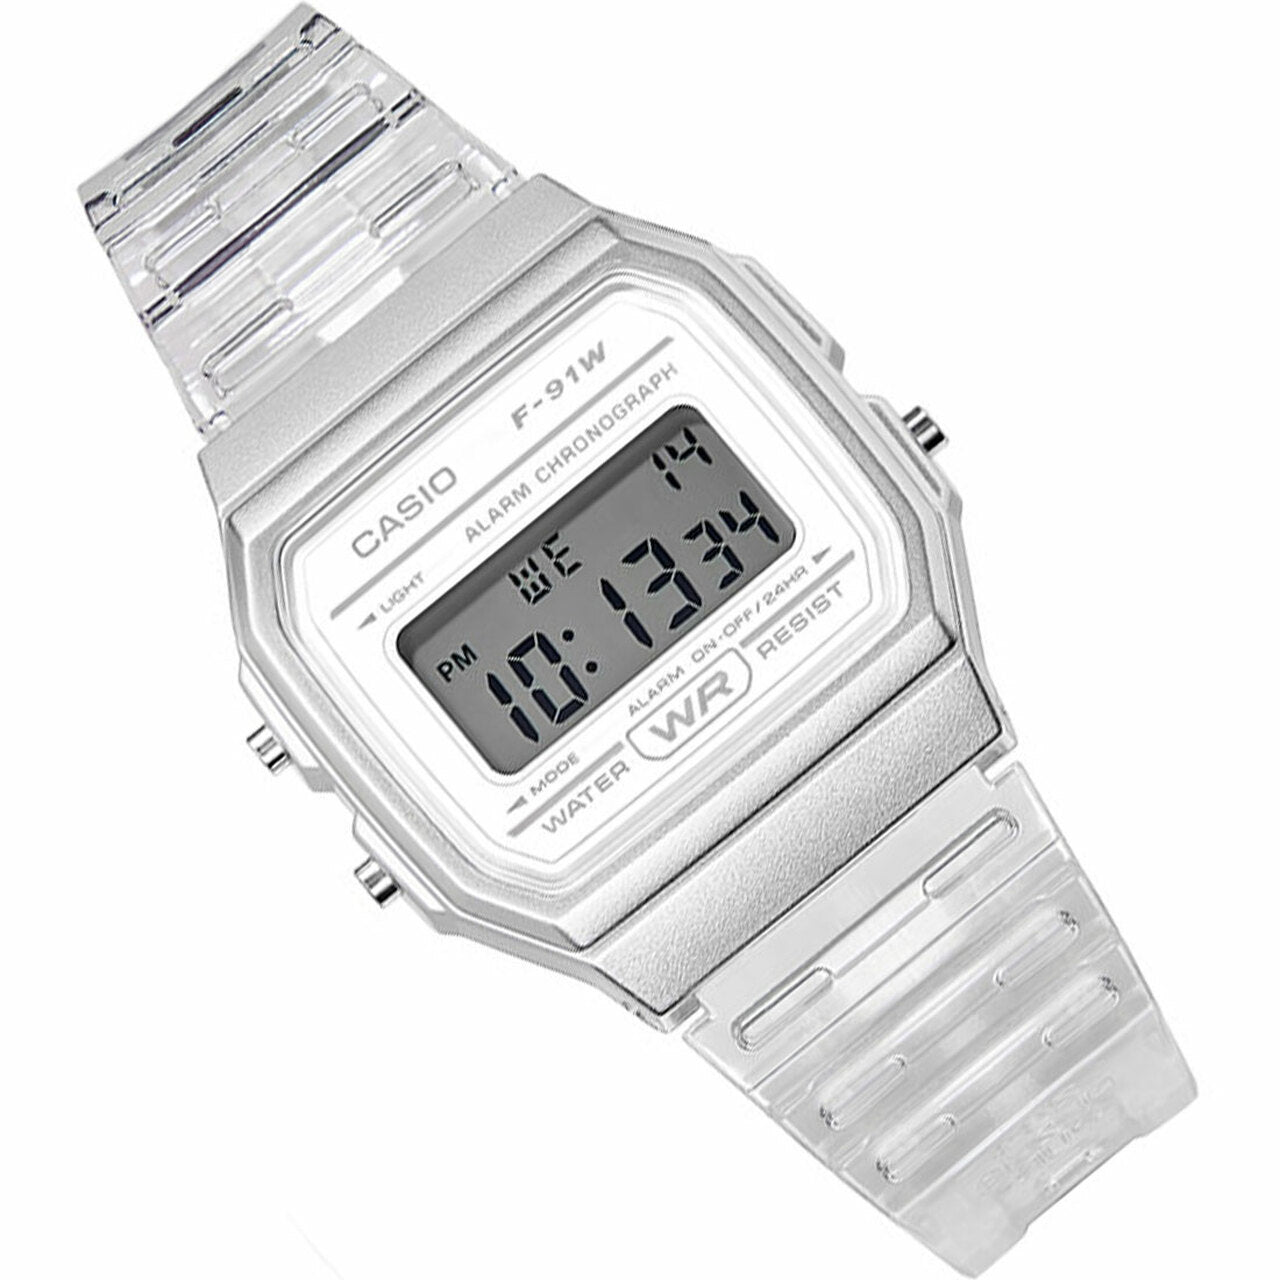 Casio Youth Digital Watch F-91WS-7DF | Stainless Steel | Mesh Strap | Water-Resistant | Minimal | Quartz Movement | Lifestyle | Business | Scratch-resistant | Fashionable | Halabh.com